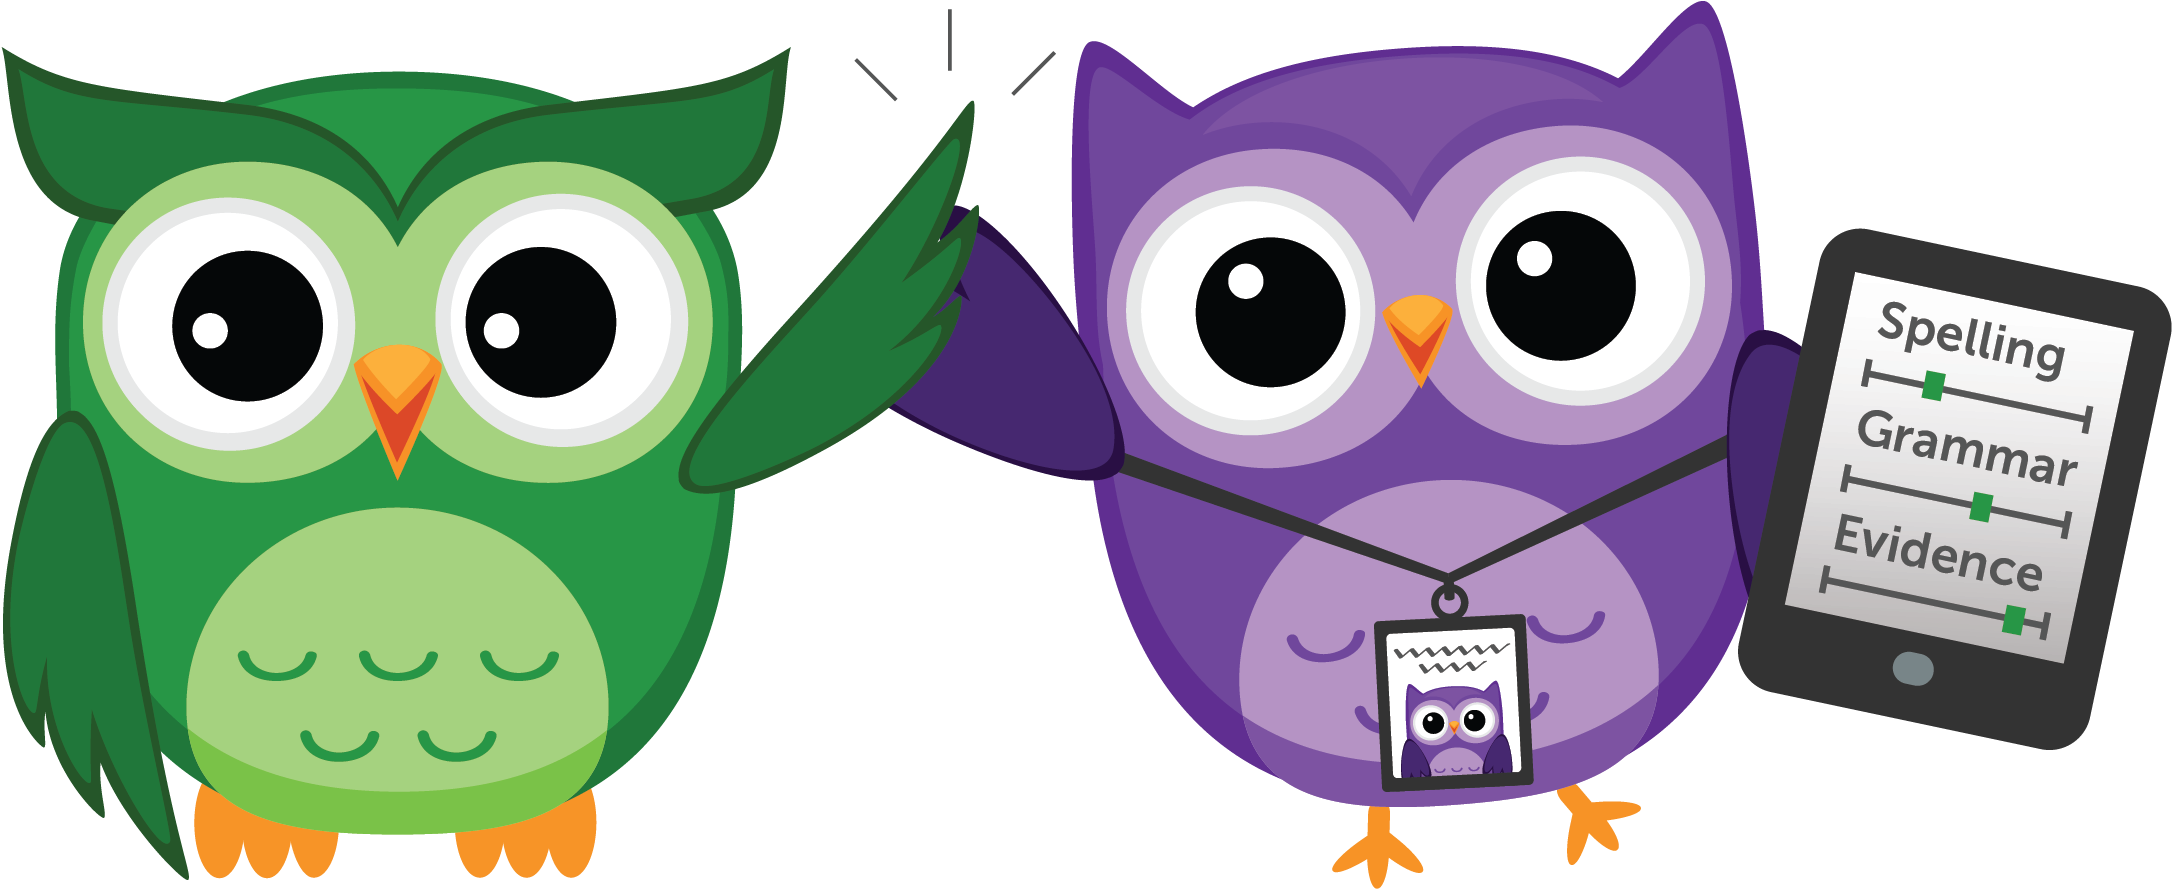 Whooo's Reading 2213 X 1296 Png 248kb - Student (2213x1296)